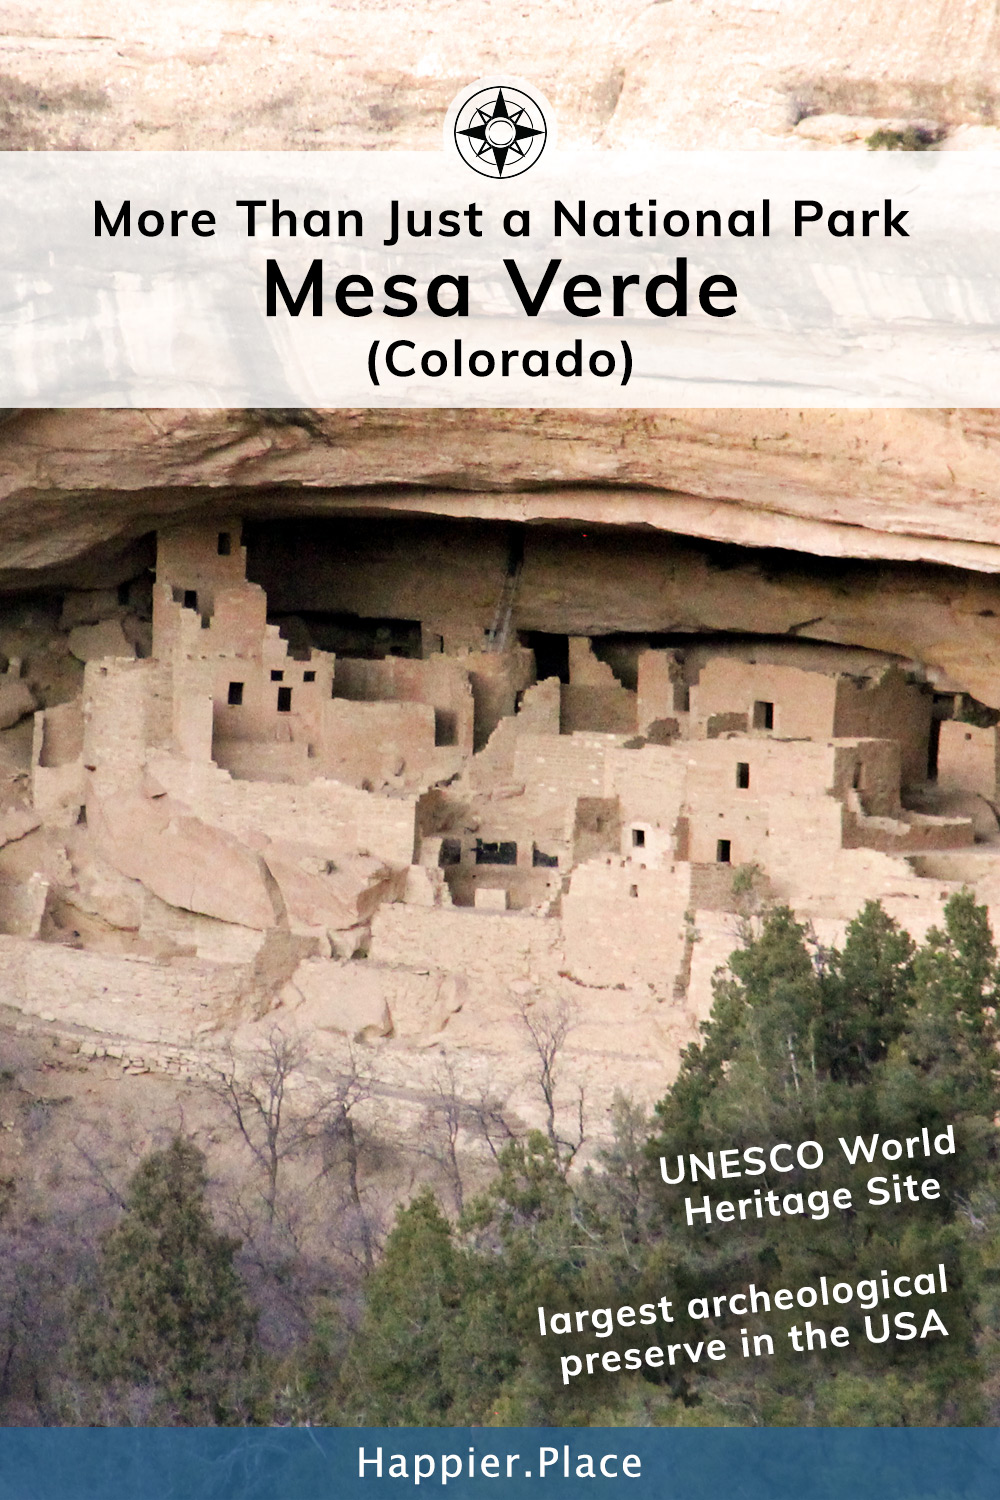 Much More Than Just a National Park: Mesa Verde in Colorado). It's an UNESCO World Heritage site and the  largest archeological site in the USA. 
